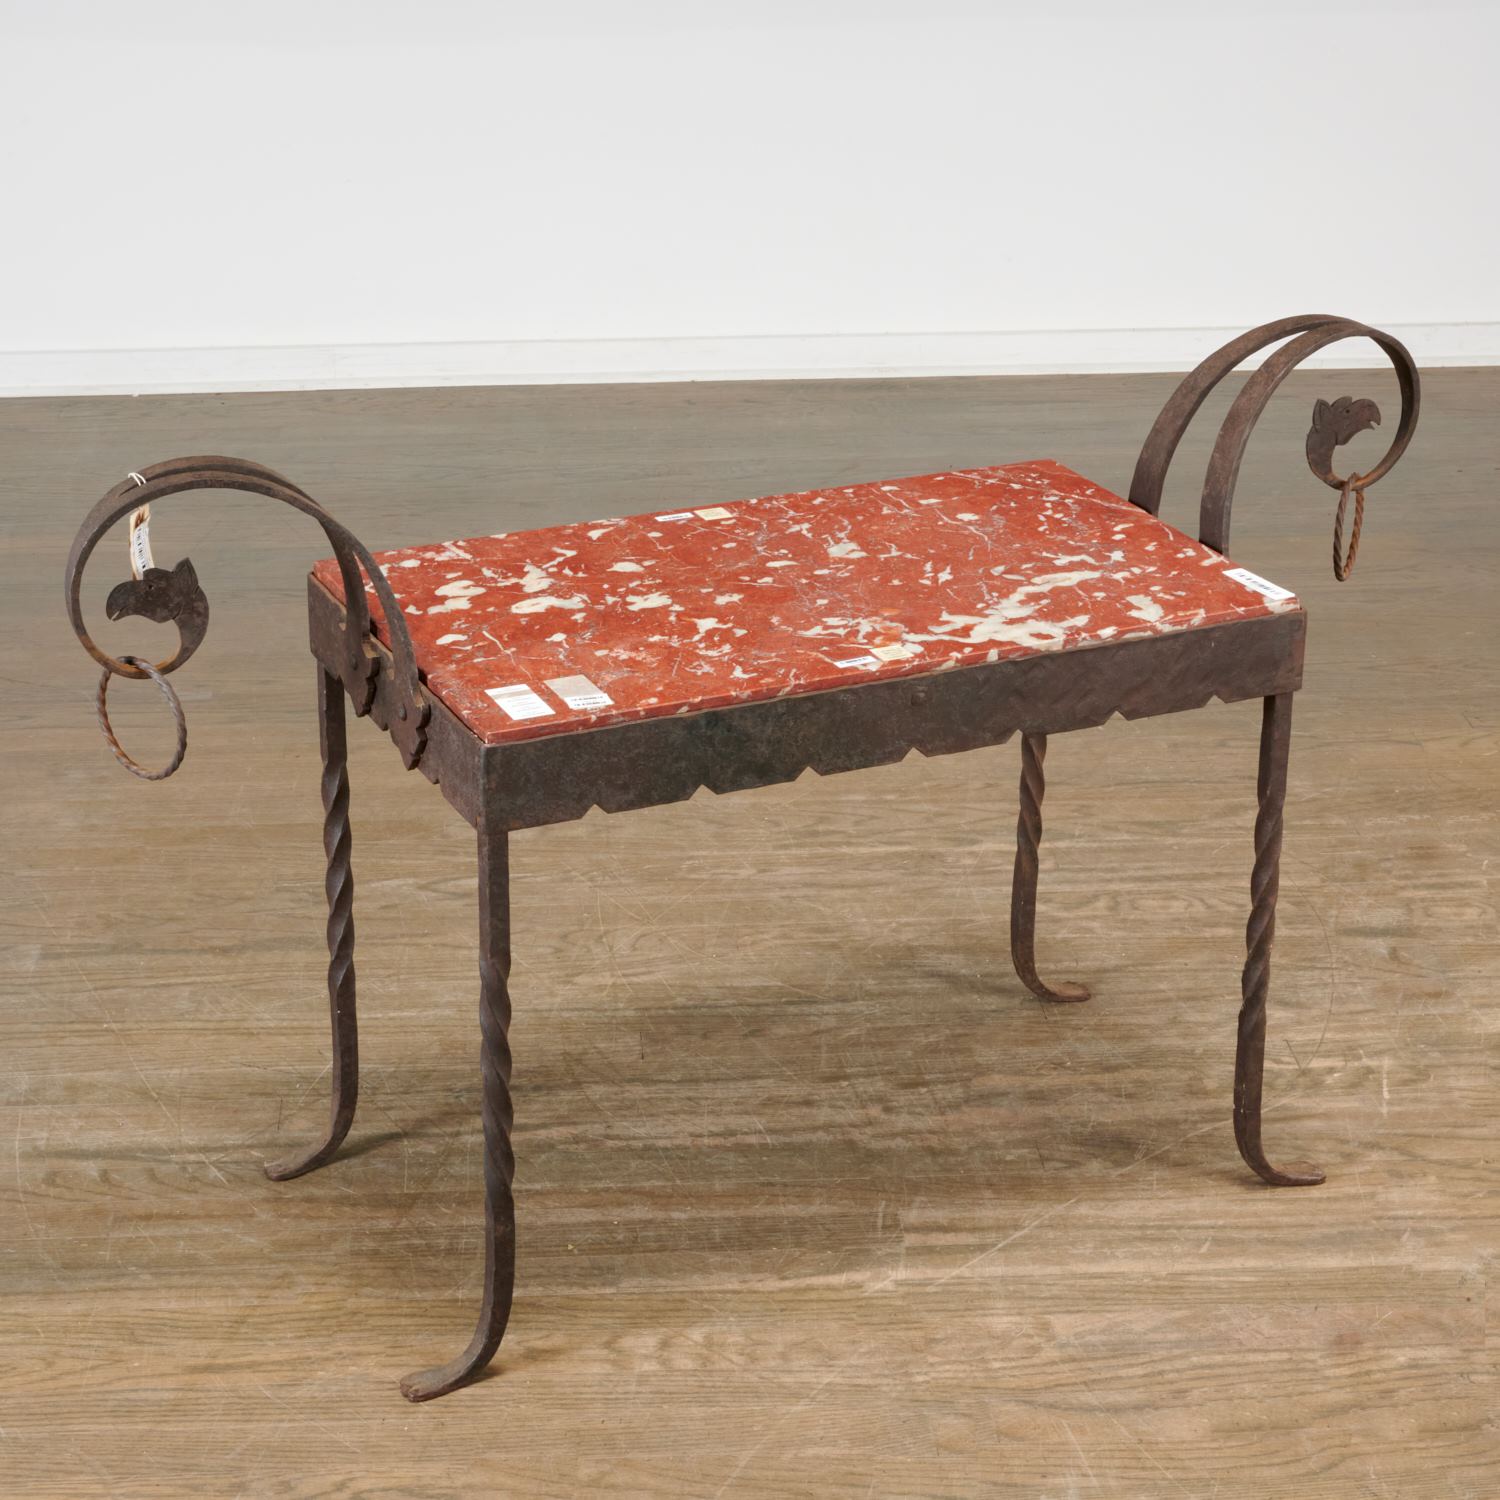 SPANISH REVIVAL WROUGHT IRON TABLE